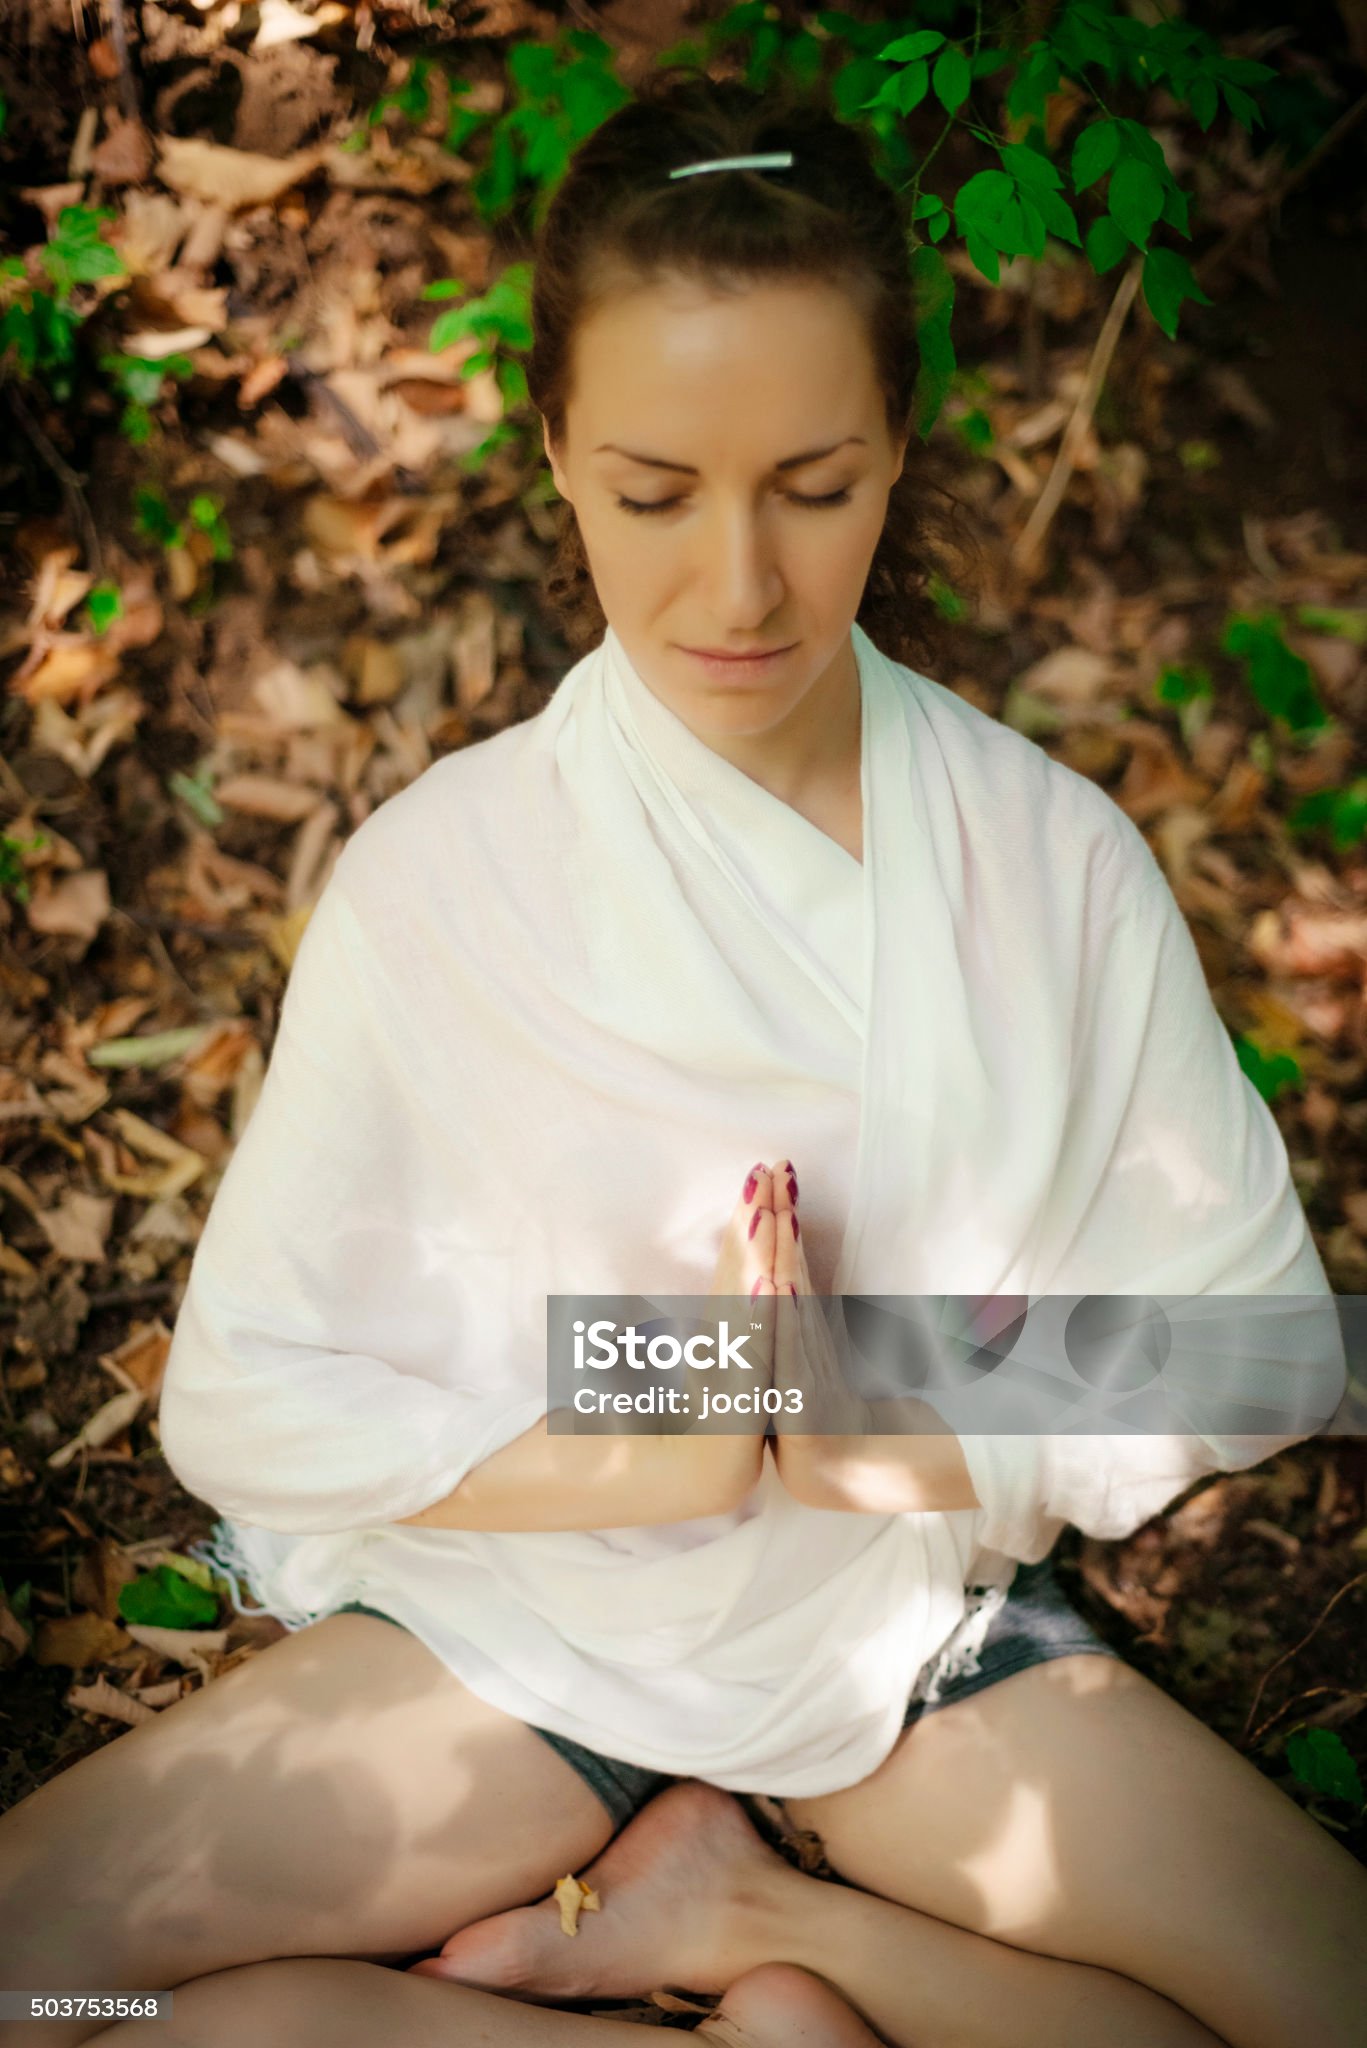 https://media.istockphoto.com/id/503753568/photo/young-woman-practicing-yoga-in-nature.jpg?s=2048x2048&amp;w=is&amp;k=20&amp;c=QyYjL_DEocaLeVrQQhV2CnQTMdmgeQyeV2vZEj2gViU=